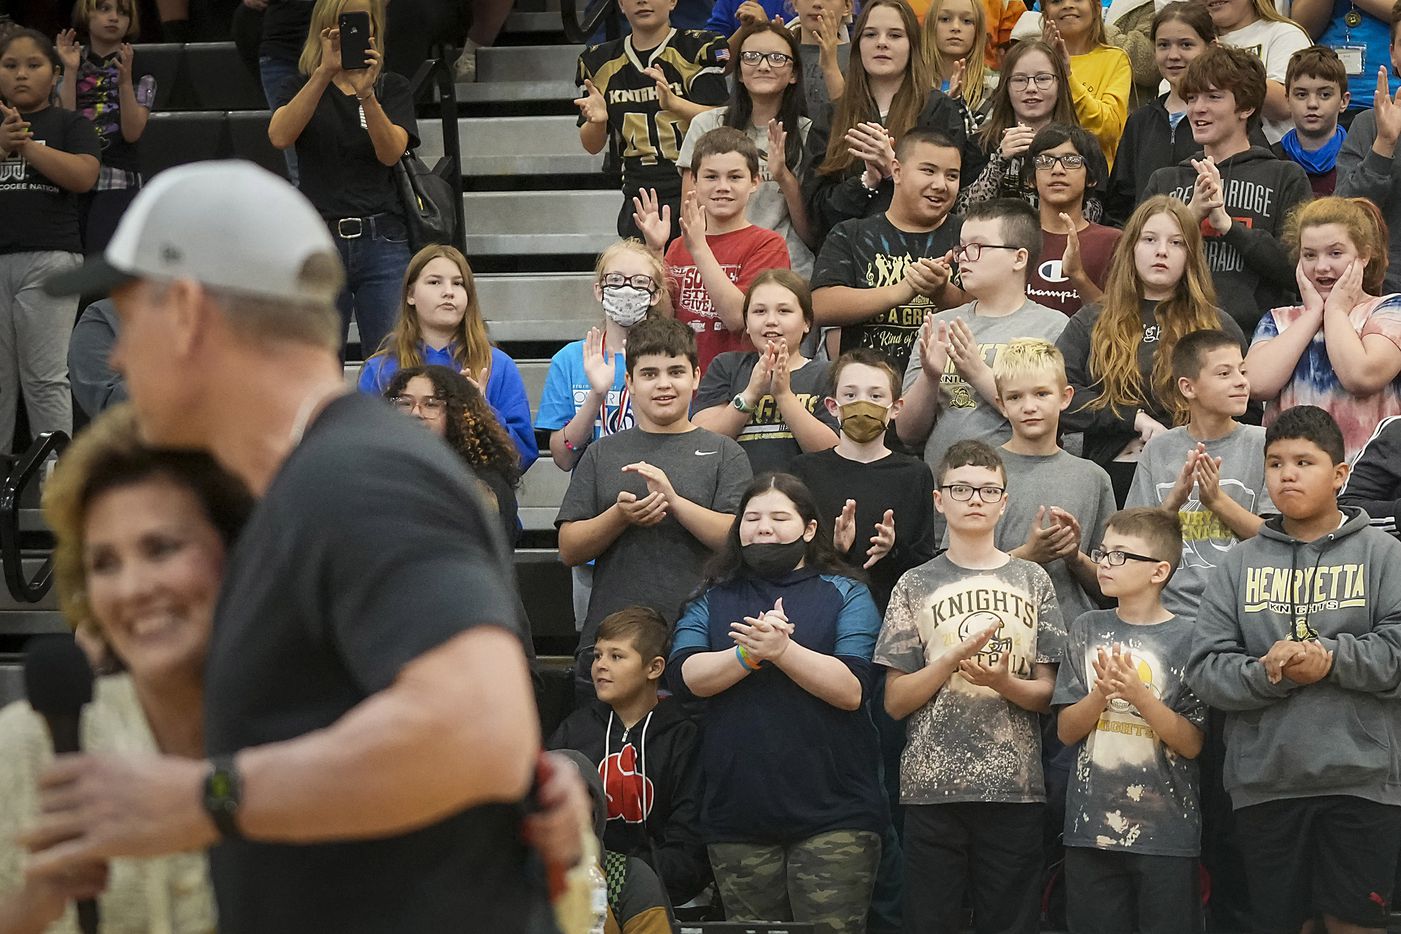 Elementary and middle school students applaud as Troy Aikman is introduced by mayor Jennifer Cummings Munholland as he arrives to surprise students during a pep rally.